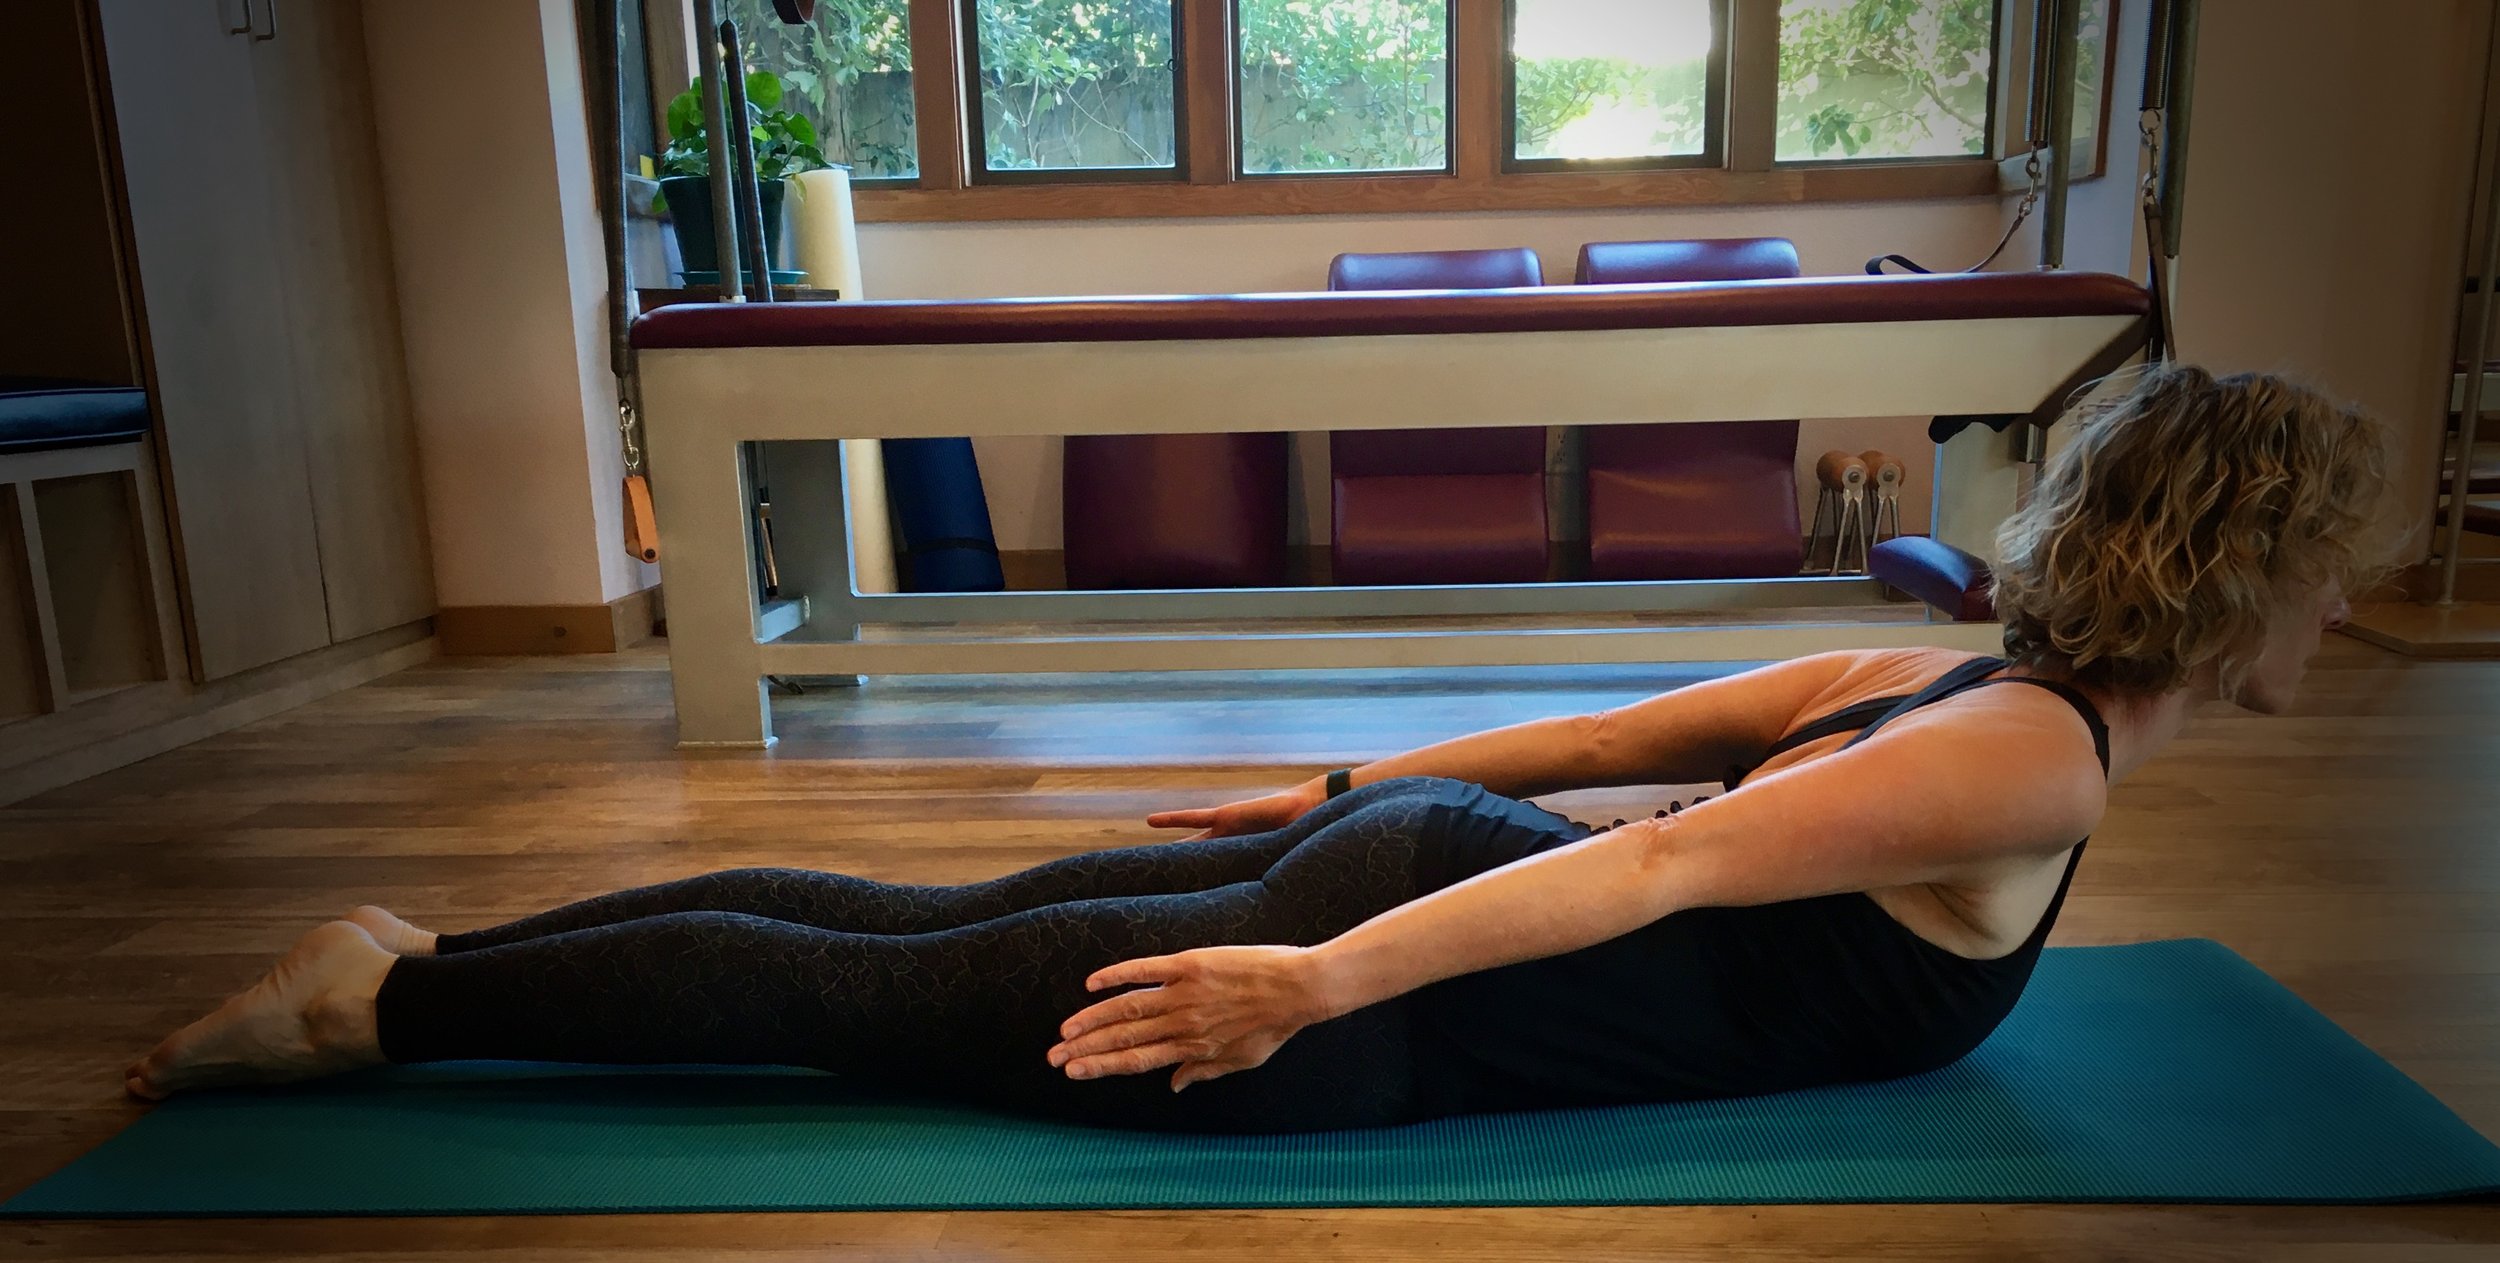 Ayurved Science Clinic - Salabhasana or Purna Salabhasana, Locust pose, or  Grasshopper pose is a prone back-bending asana in modern yoga as exercise.  Note: Consult the qualified Ayurved doctor or a qualified